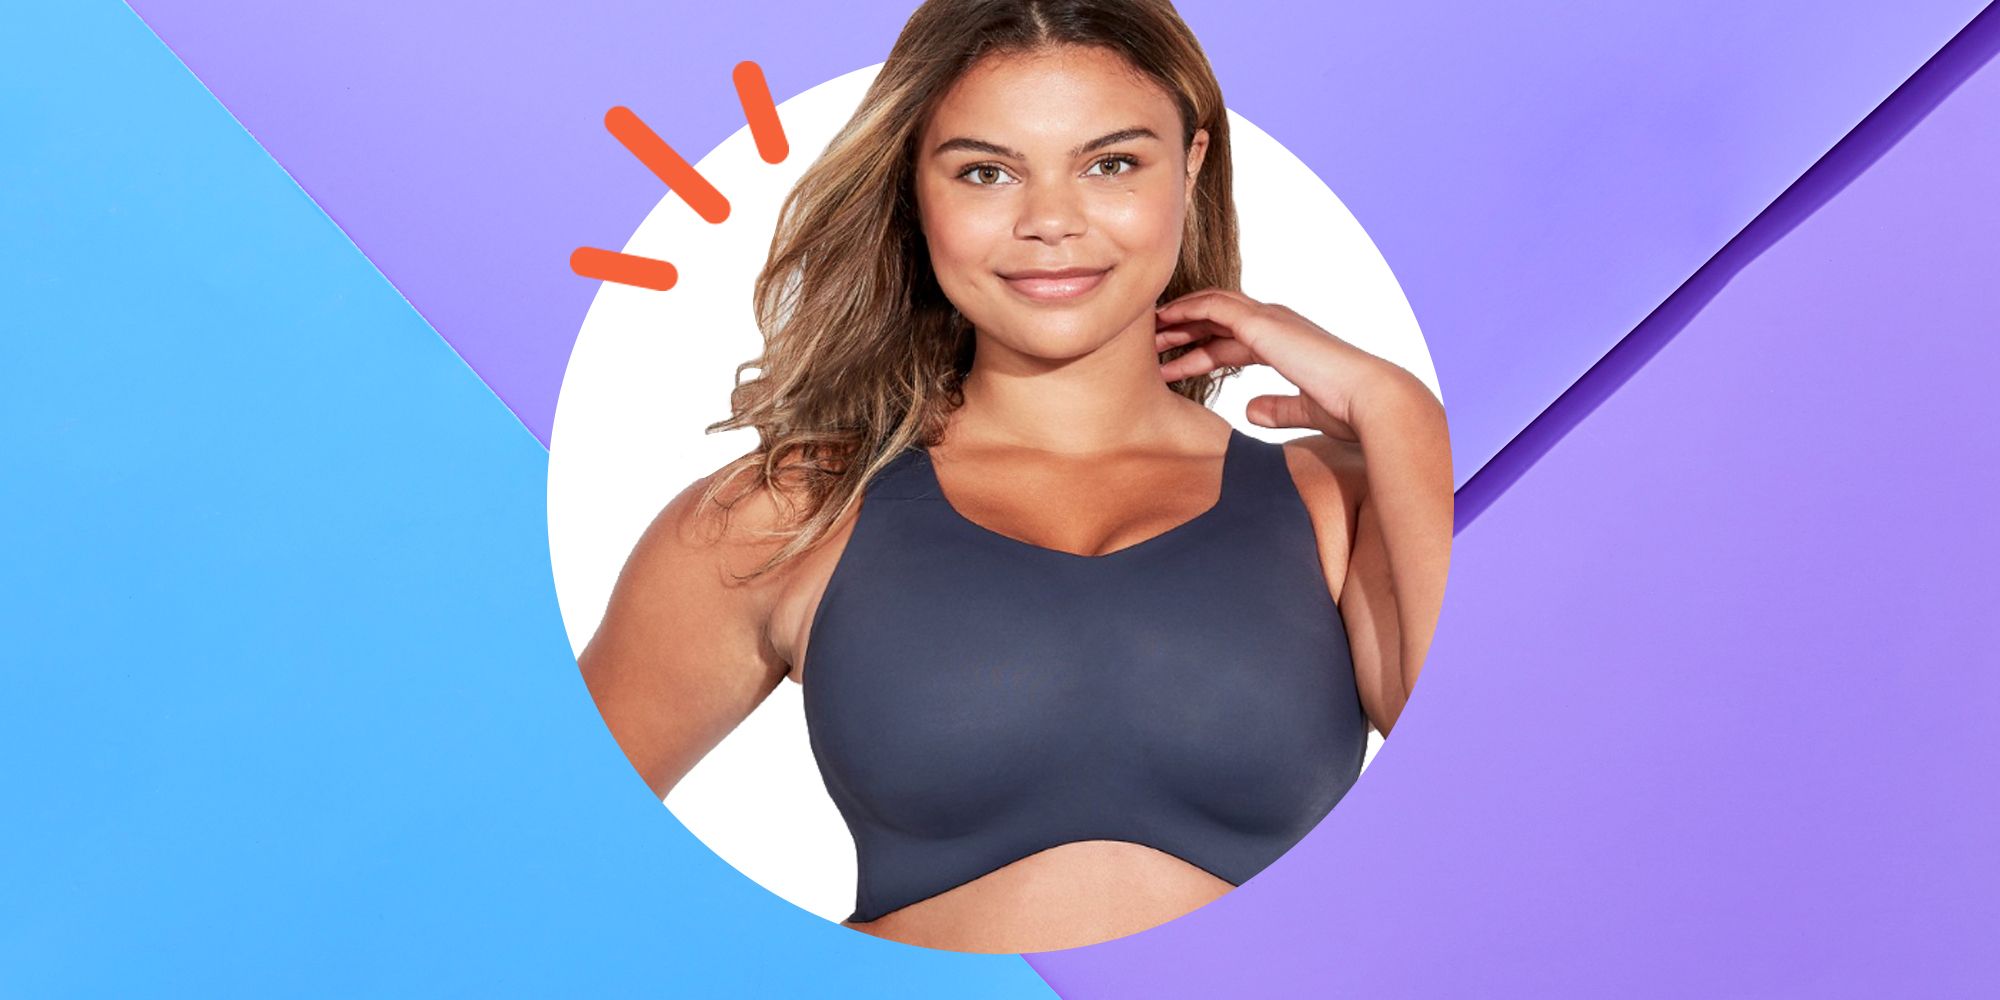 Big tits womenv 11 Best Sports Bras For Women With Big Boobs Sports Bras For Dd